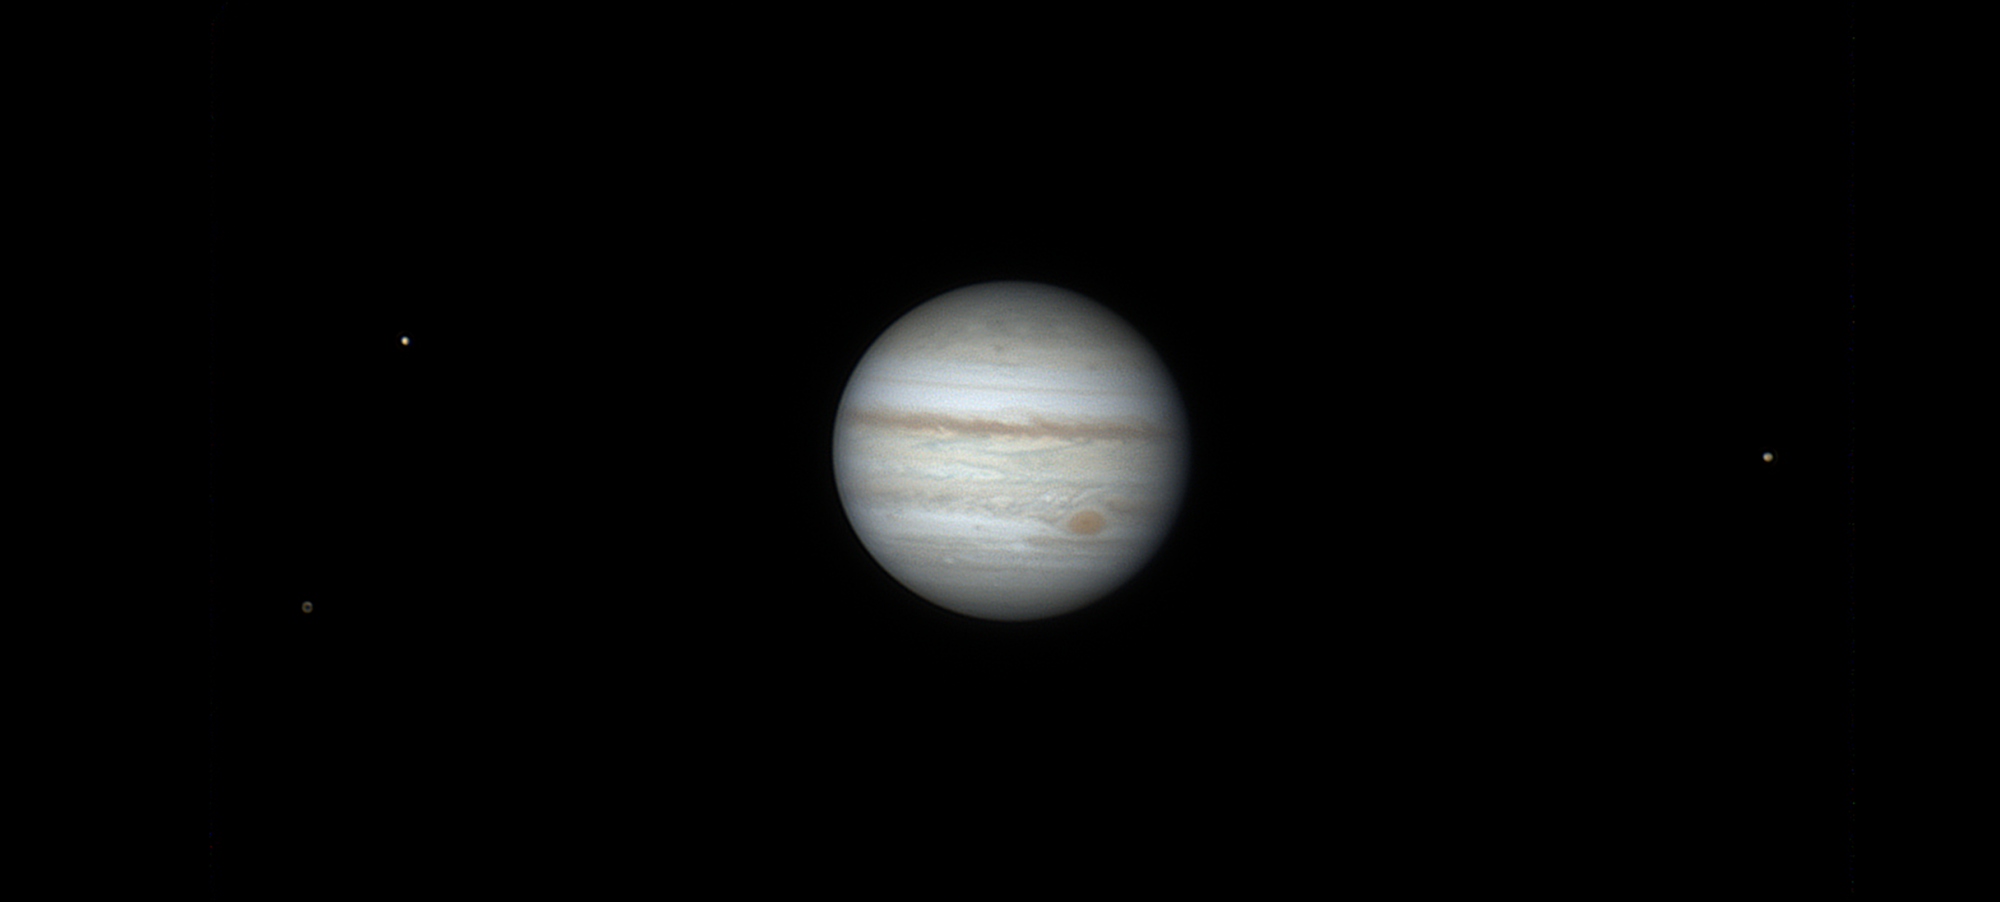 2022-06-30-0307_3-U-L-Jupiter_Taka_2506338.thumb.png.77d6d809a91126a00b39f51b5d2dfcd1.png